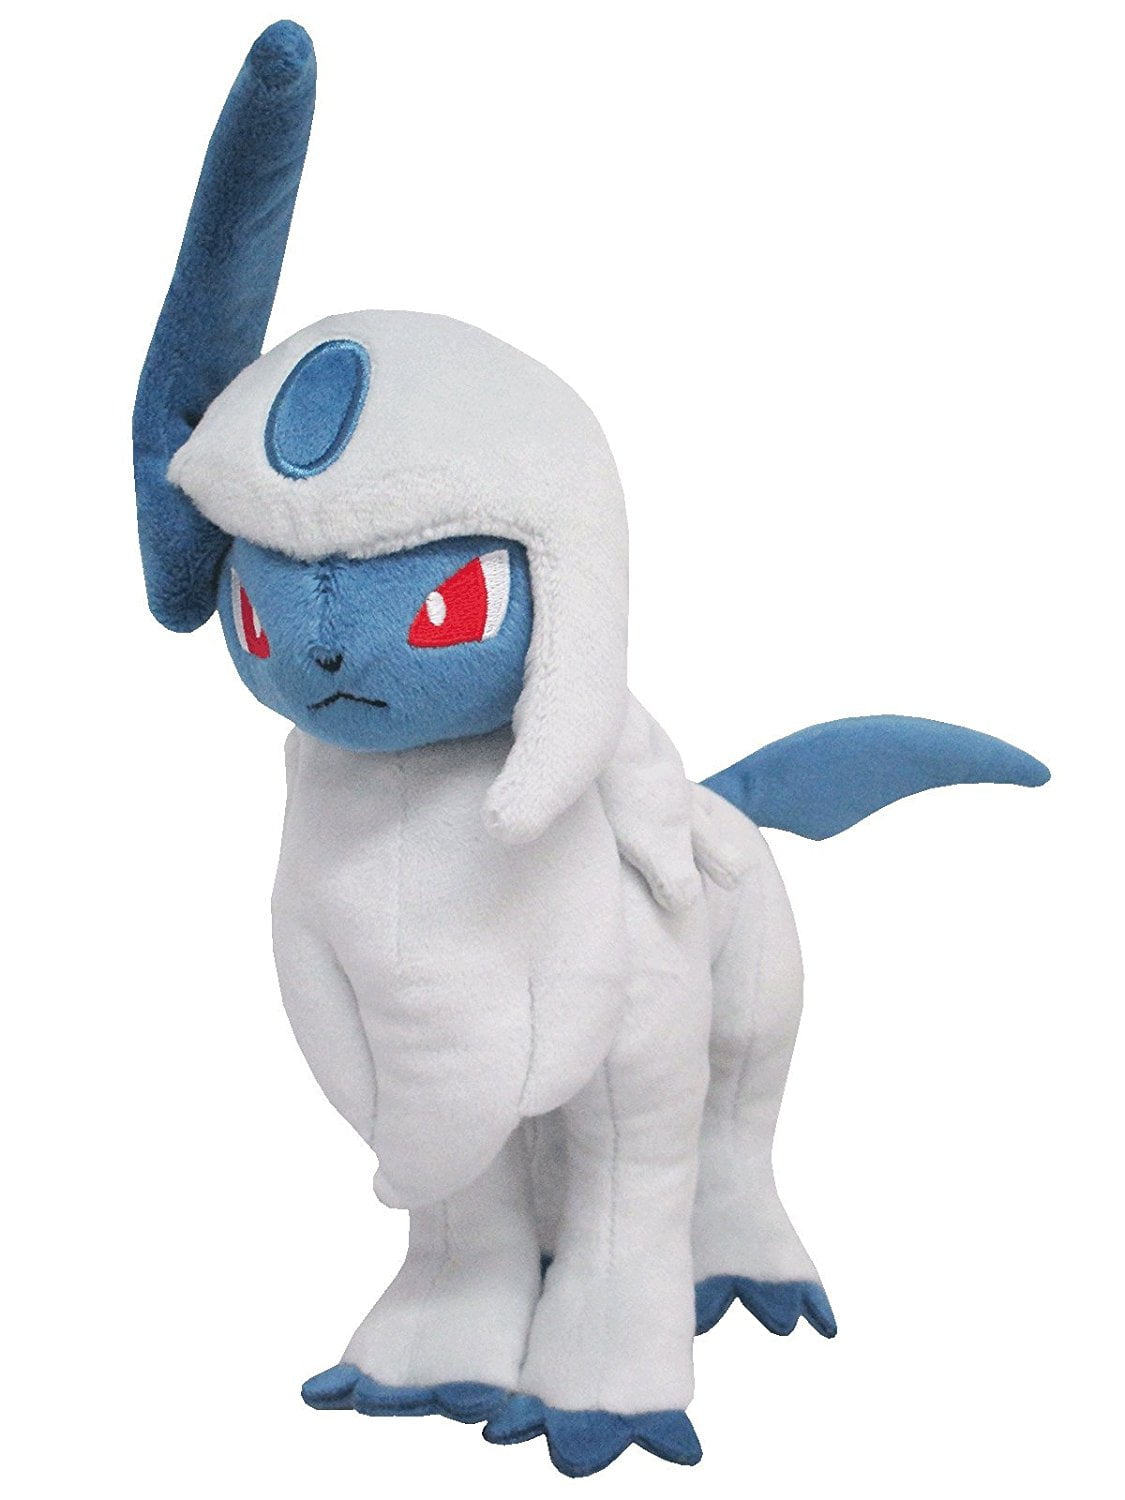 Sanei Pokemon All Star Collection Pp142 Lugia 8" Stuffed Plush Authentic USA for sale online 